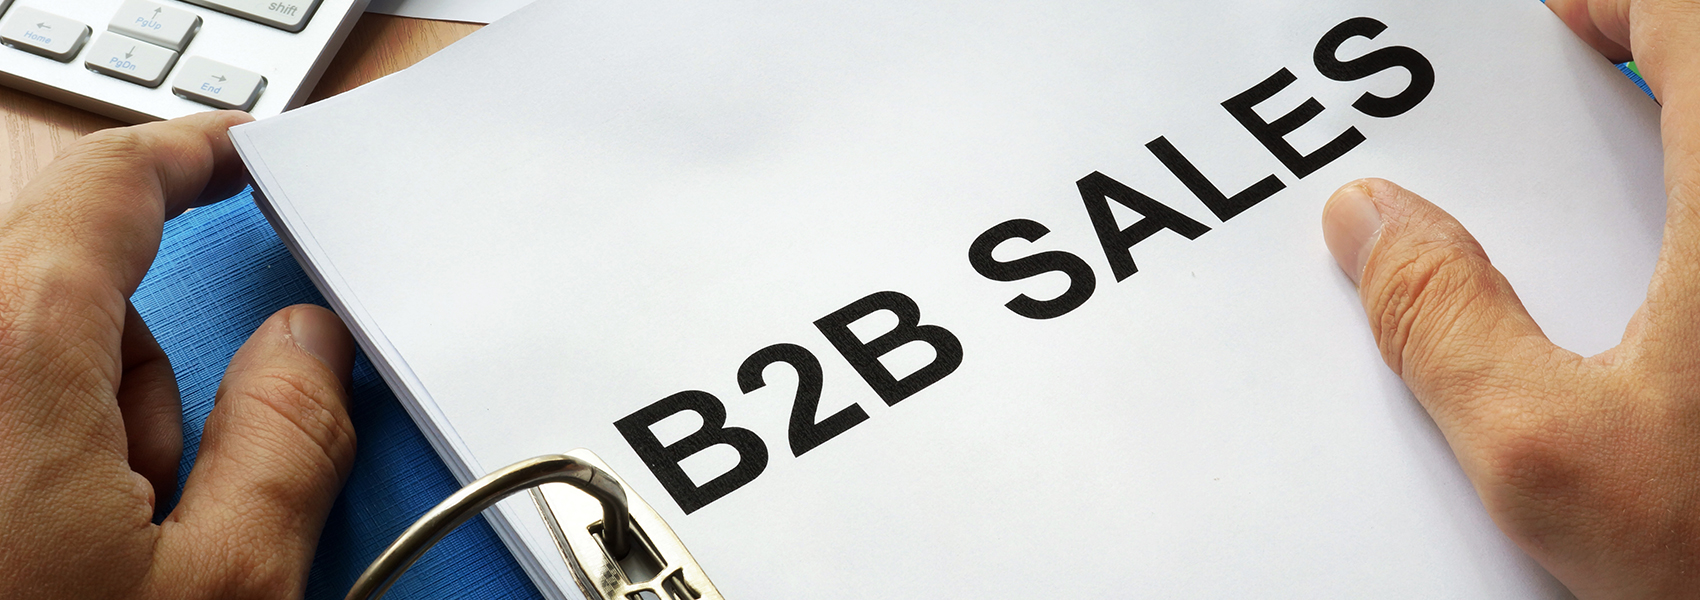 Proven B2B Sales Techniques for Business Growth